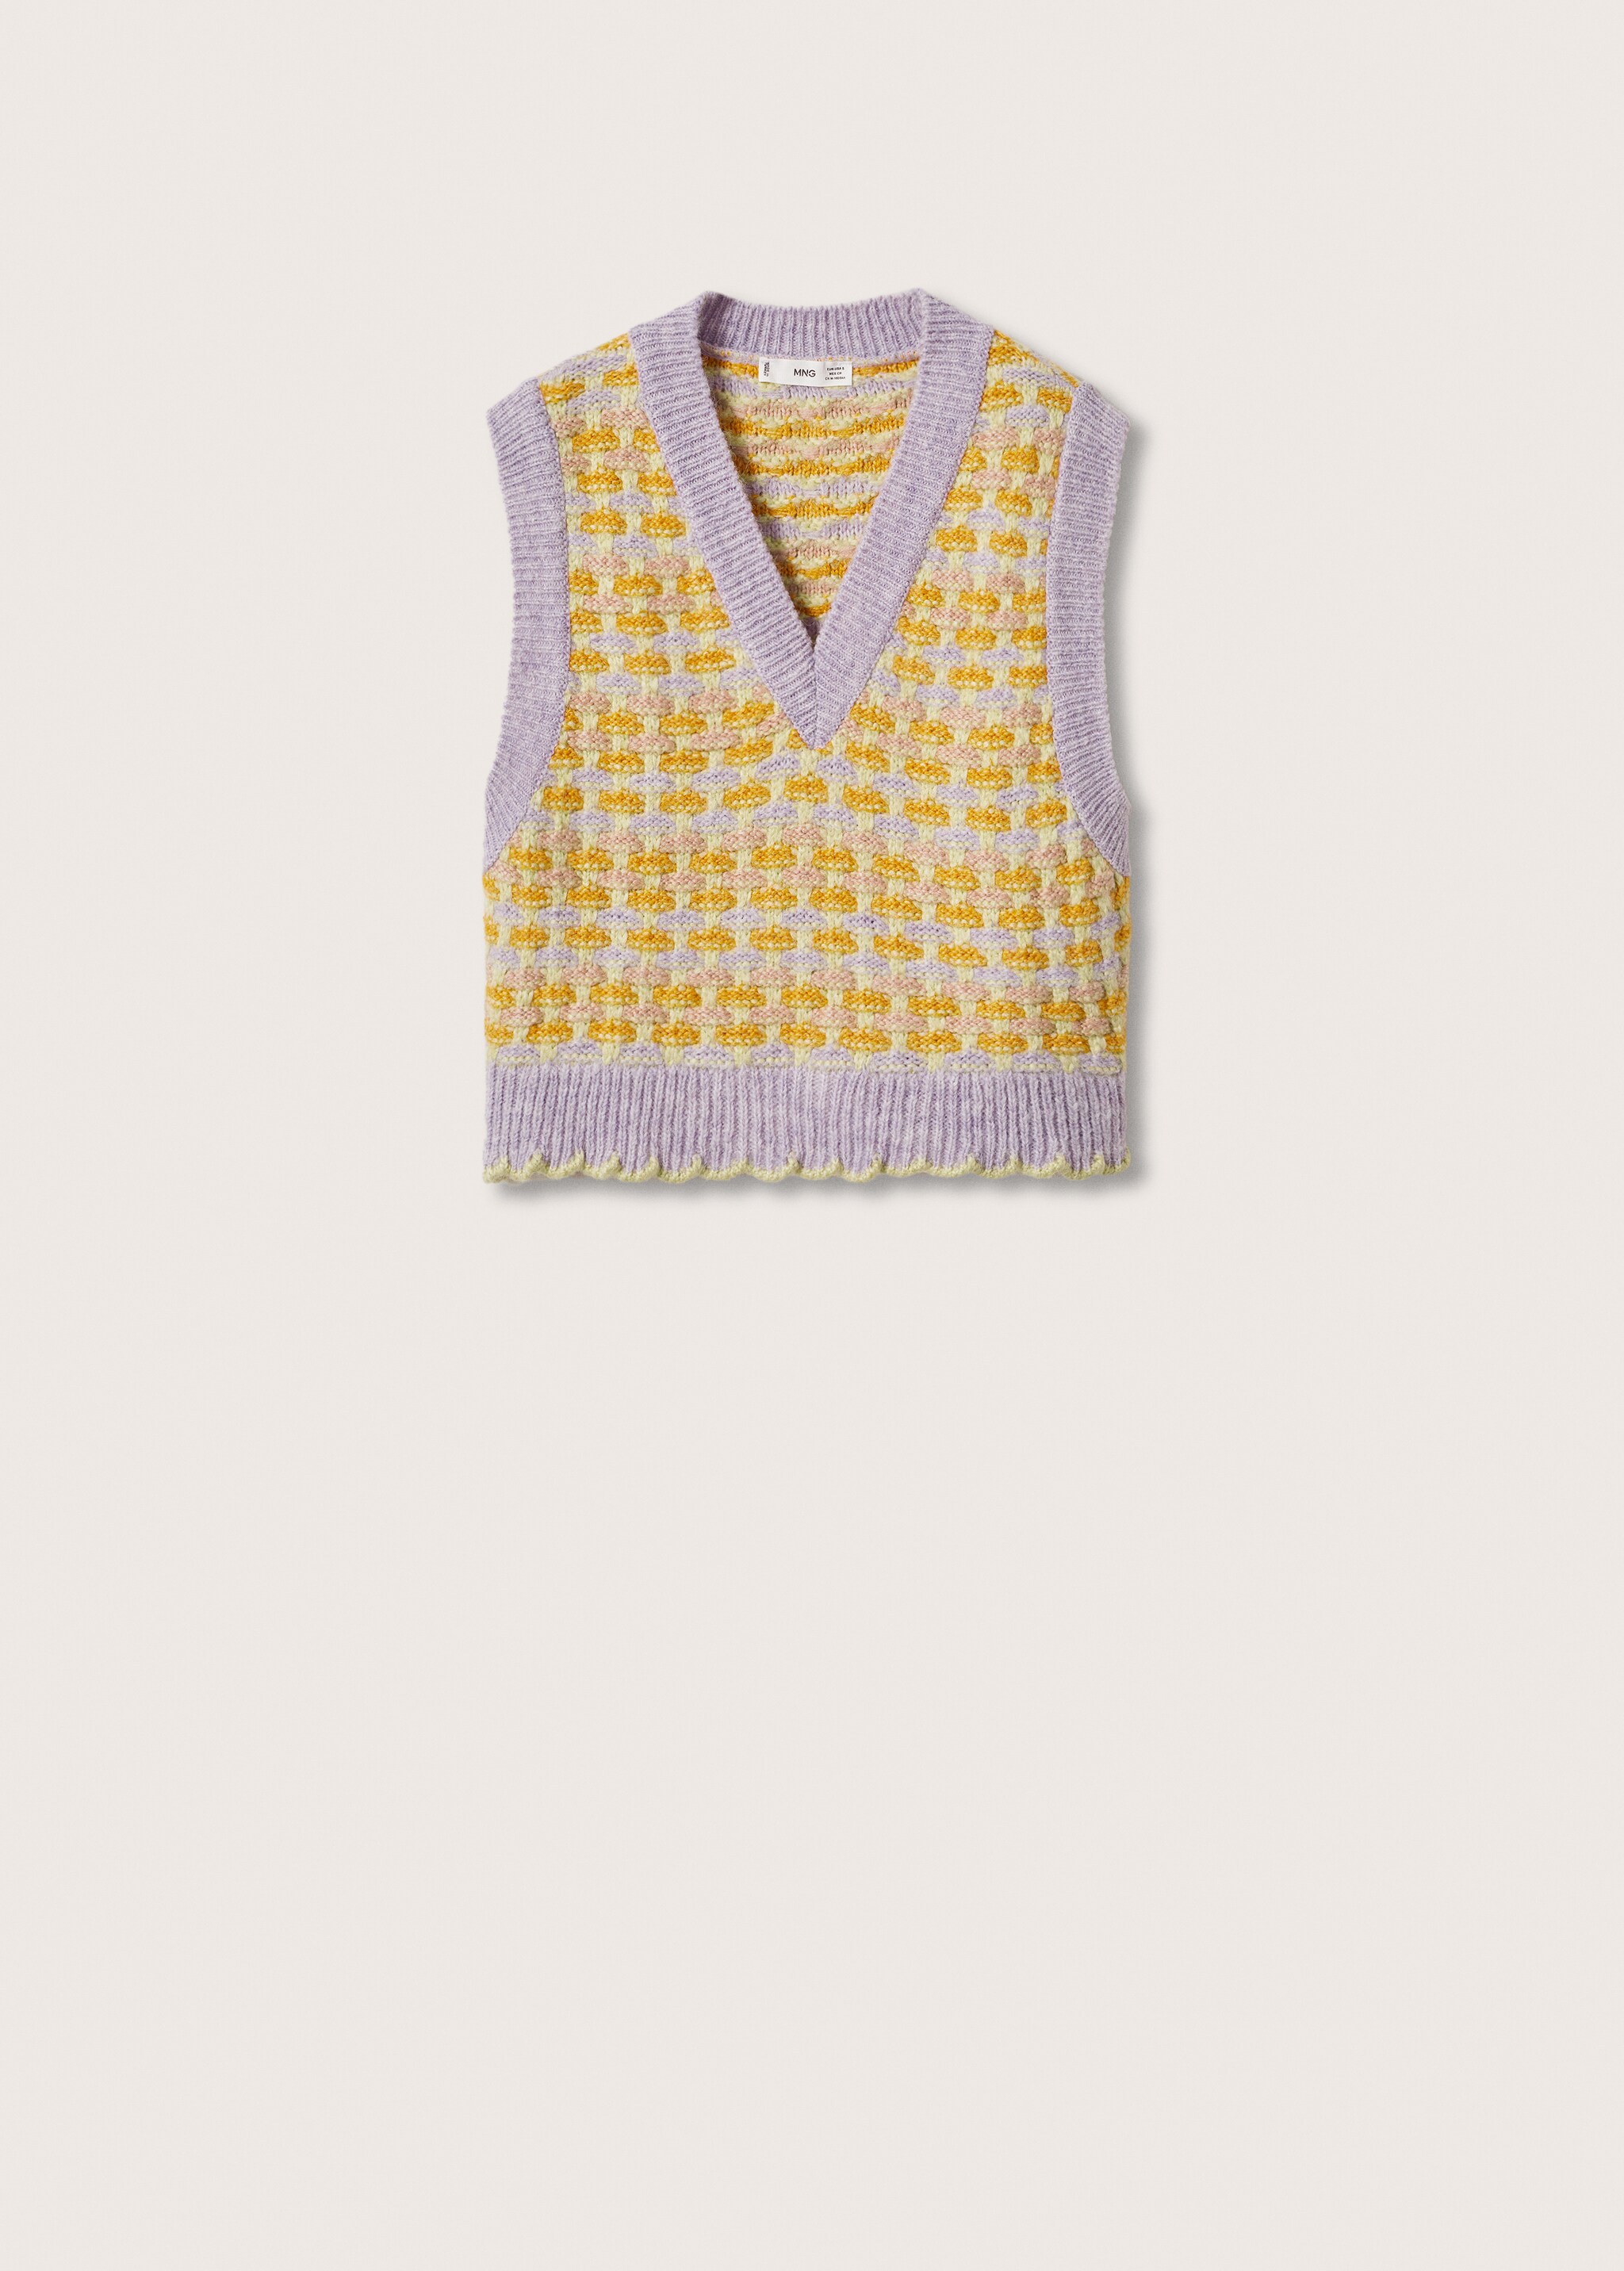 Multi-colored knitted vest - Article without model